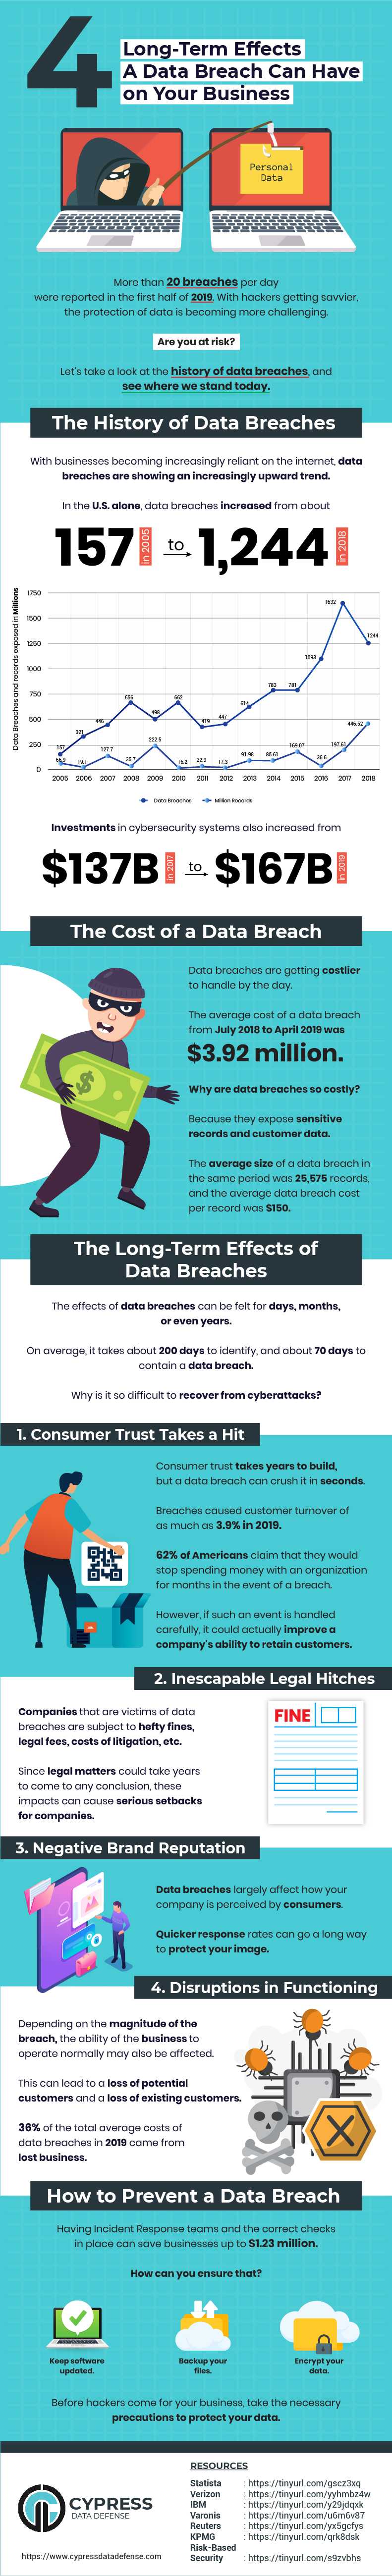 Long Term Effects a Data Breach Can Have on Your Business-Infographic